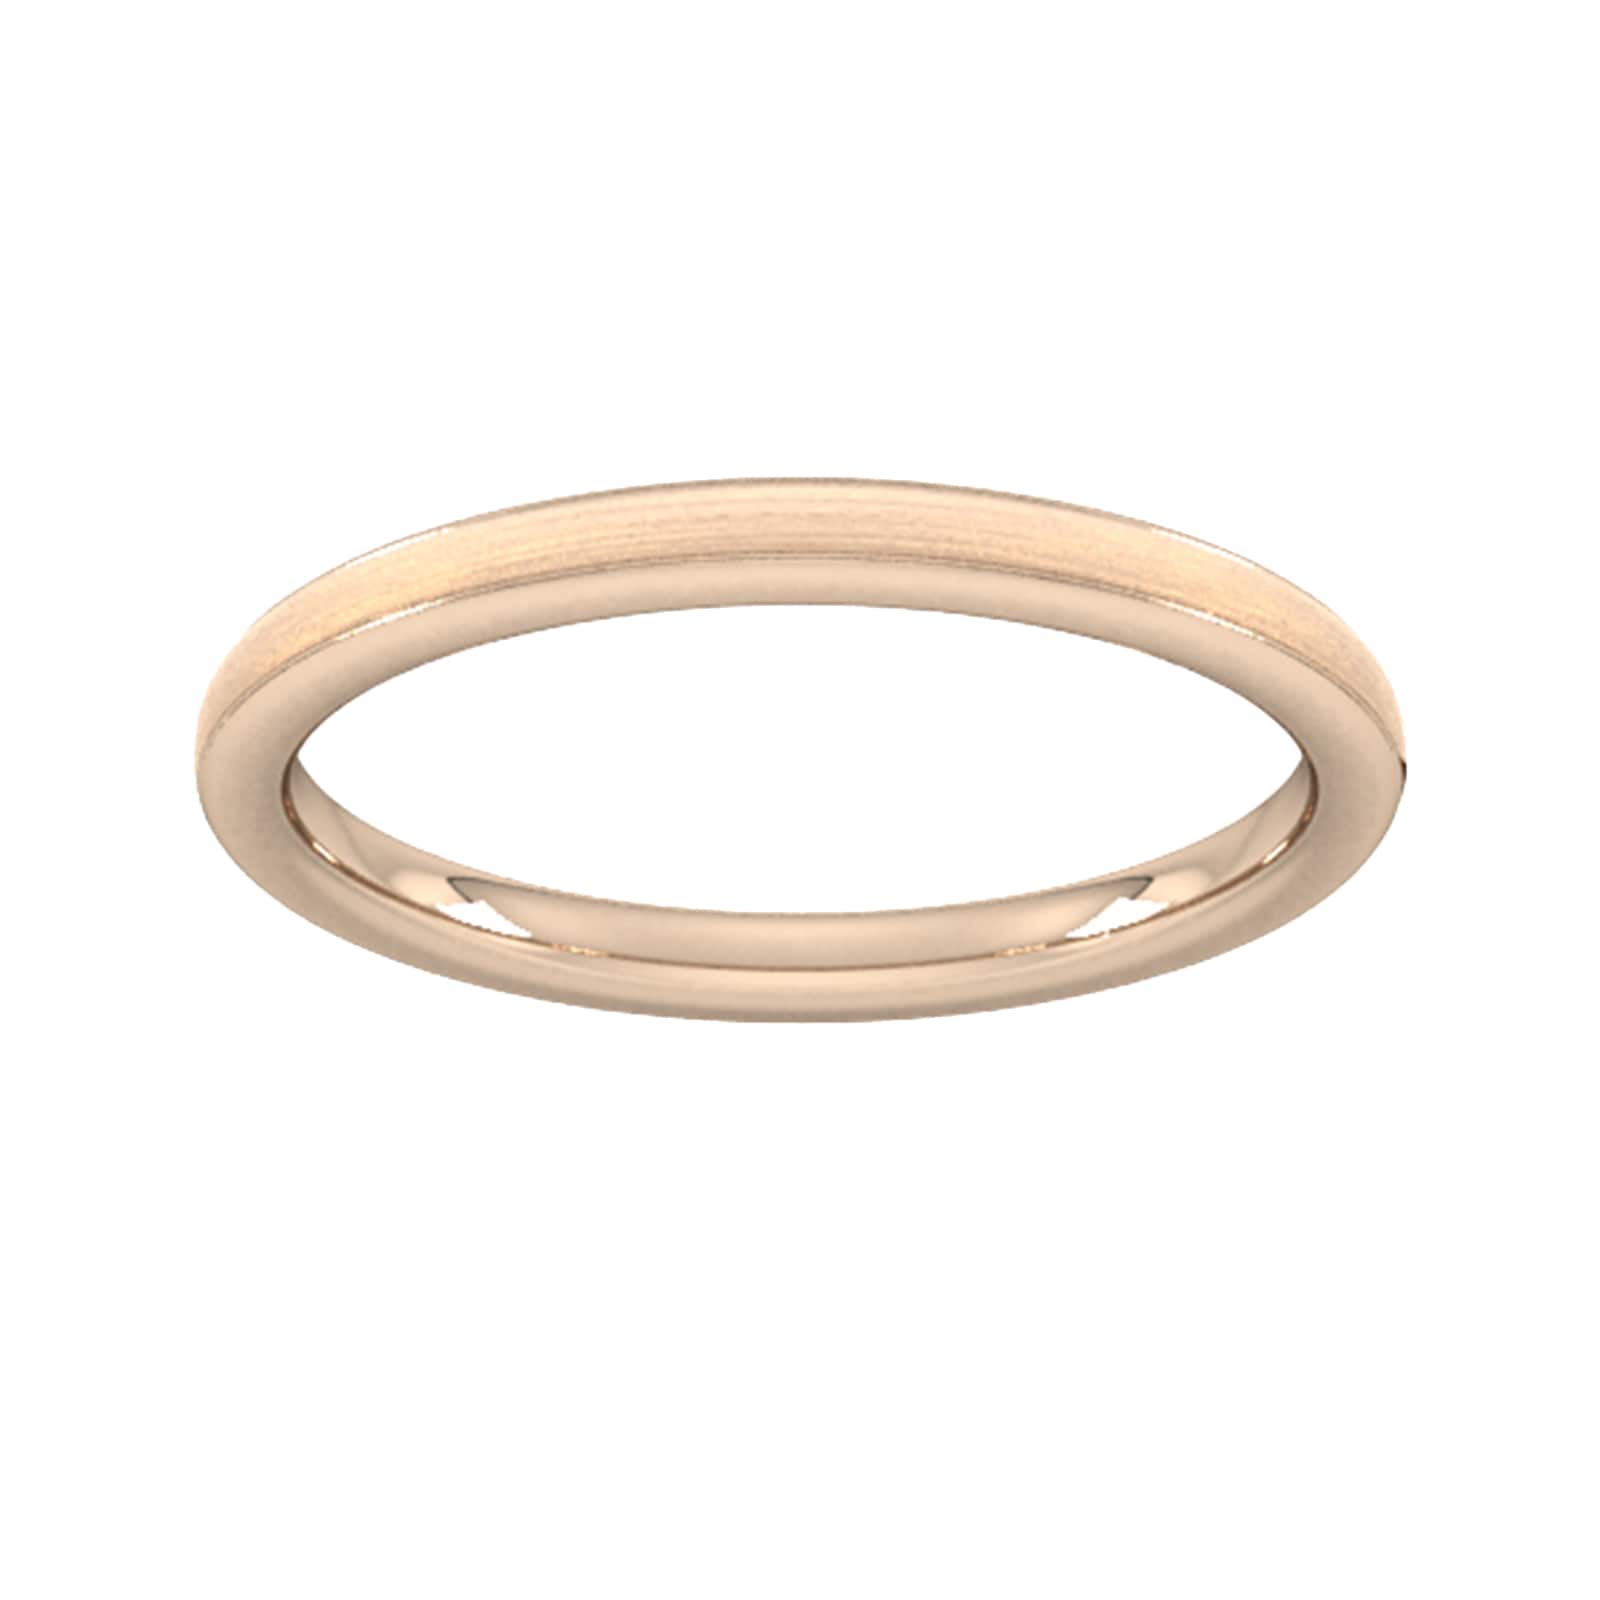 2mm D Shape Heavy Matt Centre With Grooves Wedding Ring In 18 Carat Rose Gold - Ring Size S